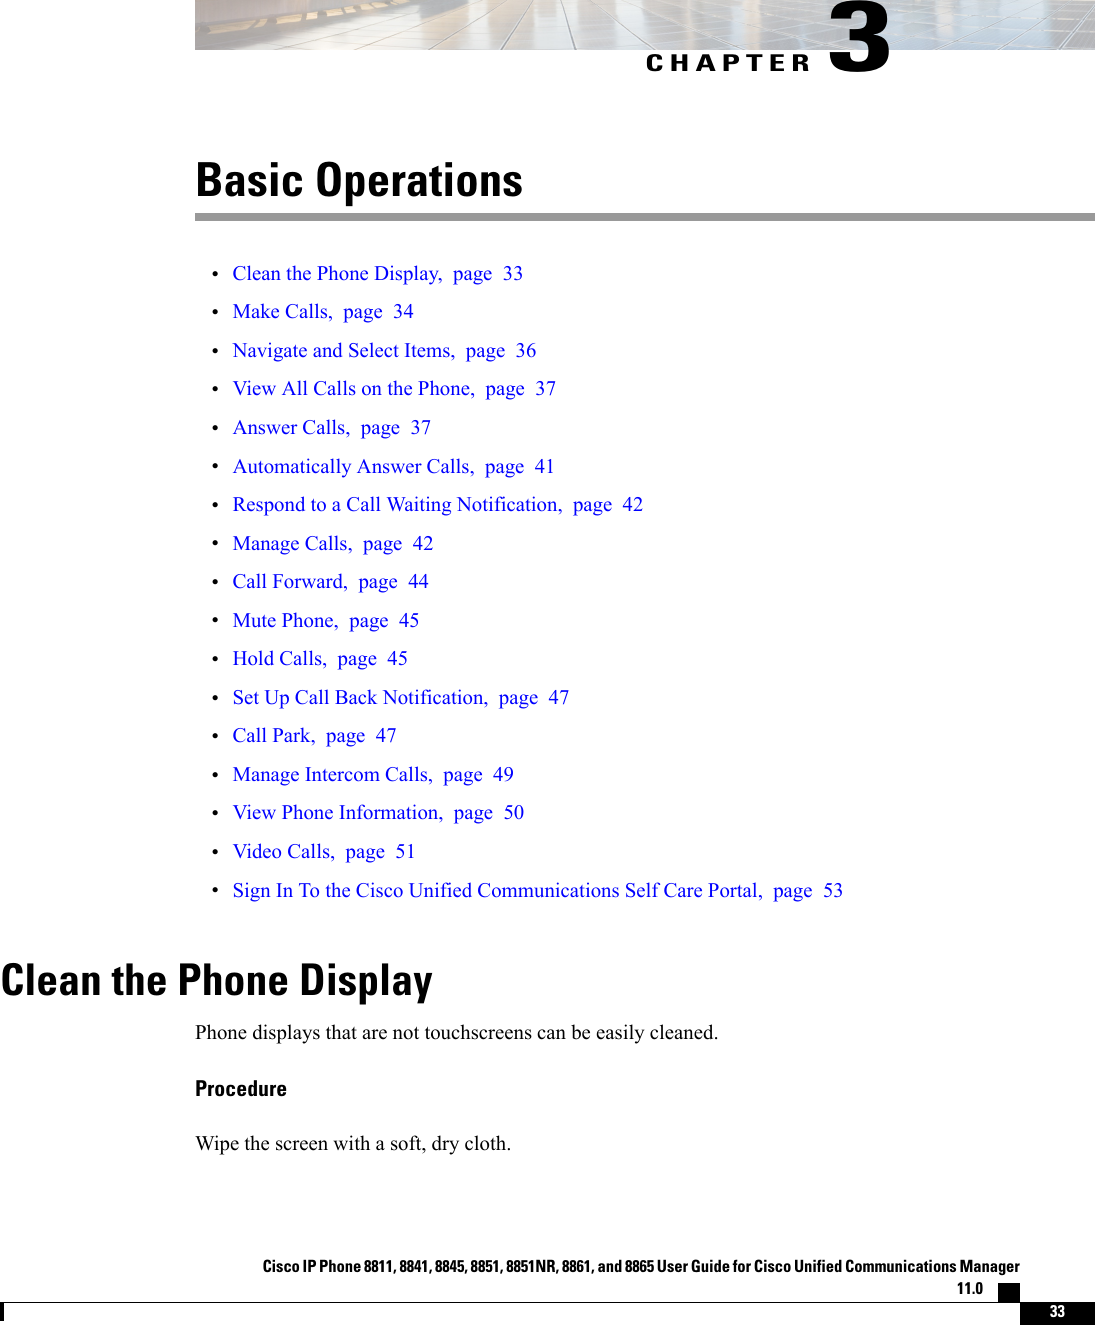 CHAPTER 3Basic Operations•Clean the Phone Display, page 33•Make Calls, page 34•Navigate and Select Items, page 36•View All Calls on the Phone, page 37•Answer Calls, page 37•Automatically Answer Calls, page 41•Respond to a Call Waiting Notification, page 42•Manage Calls, page 42•Call Forward, page 44•Mute Phone, page 45•Hold Calls, page 45•Set Up Call Back Notification, page 47•Call Park, page 47•Manage Intercom Calls, page 49•View Phone Information, page 50•Video Calls, page 51•Sign In To the Cisco Unified Communications Self Care Portal, page 53Clean the Phone DisplayPhone displays that are not touchscreens can be easily cleaned.ProcedureWipe the screen with a soft, dry cloth.Cisco IP Phone 8811, 8841, 8845, 8851, 8851NR, 8861, and 8865 User Guide for Cisco Unified Communications Manager11.0    33